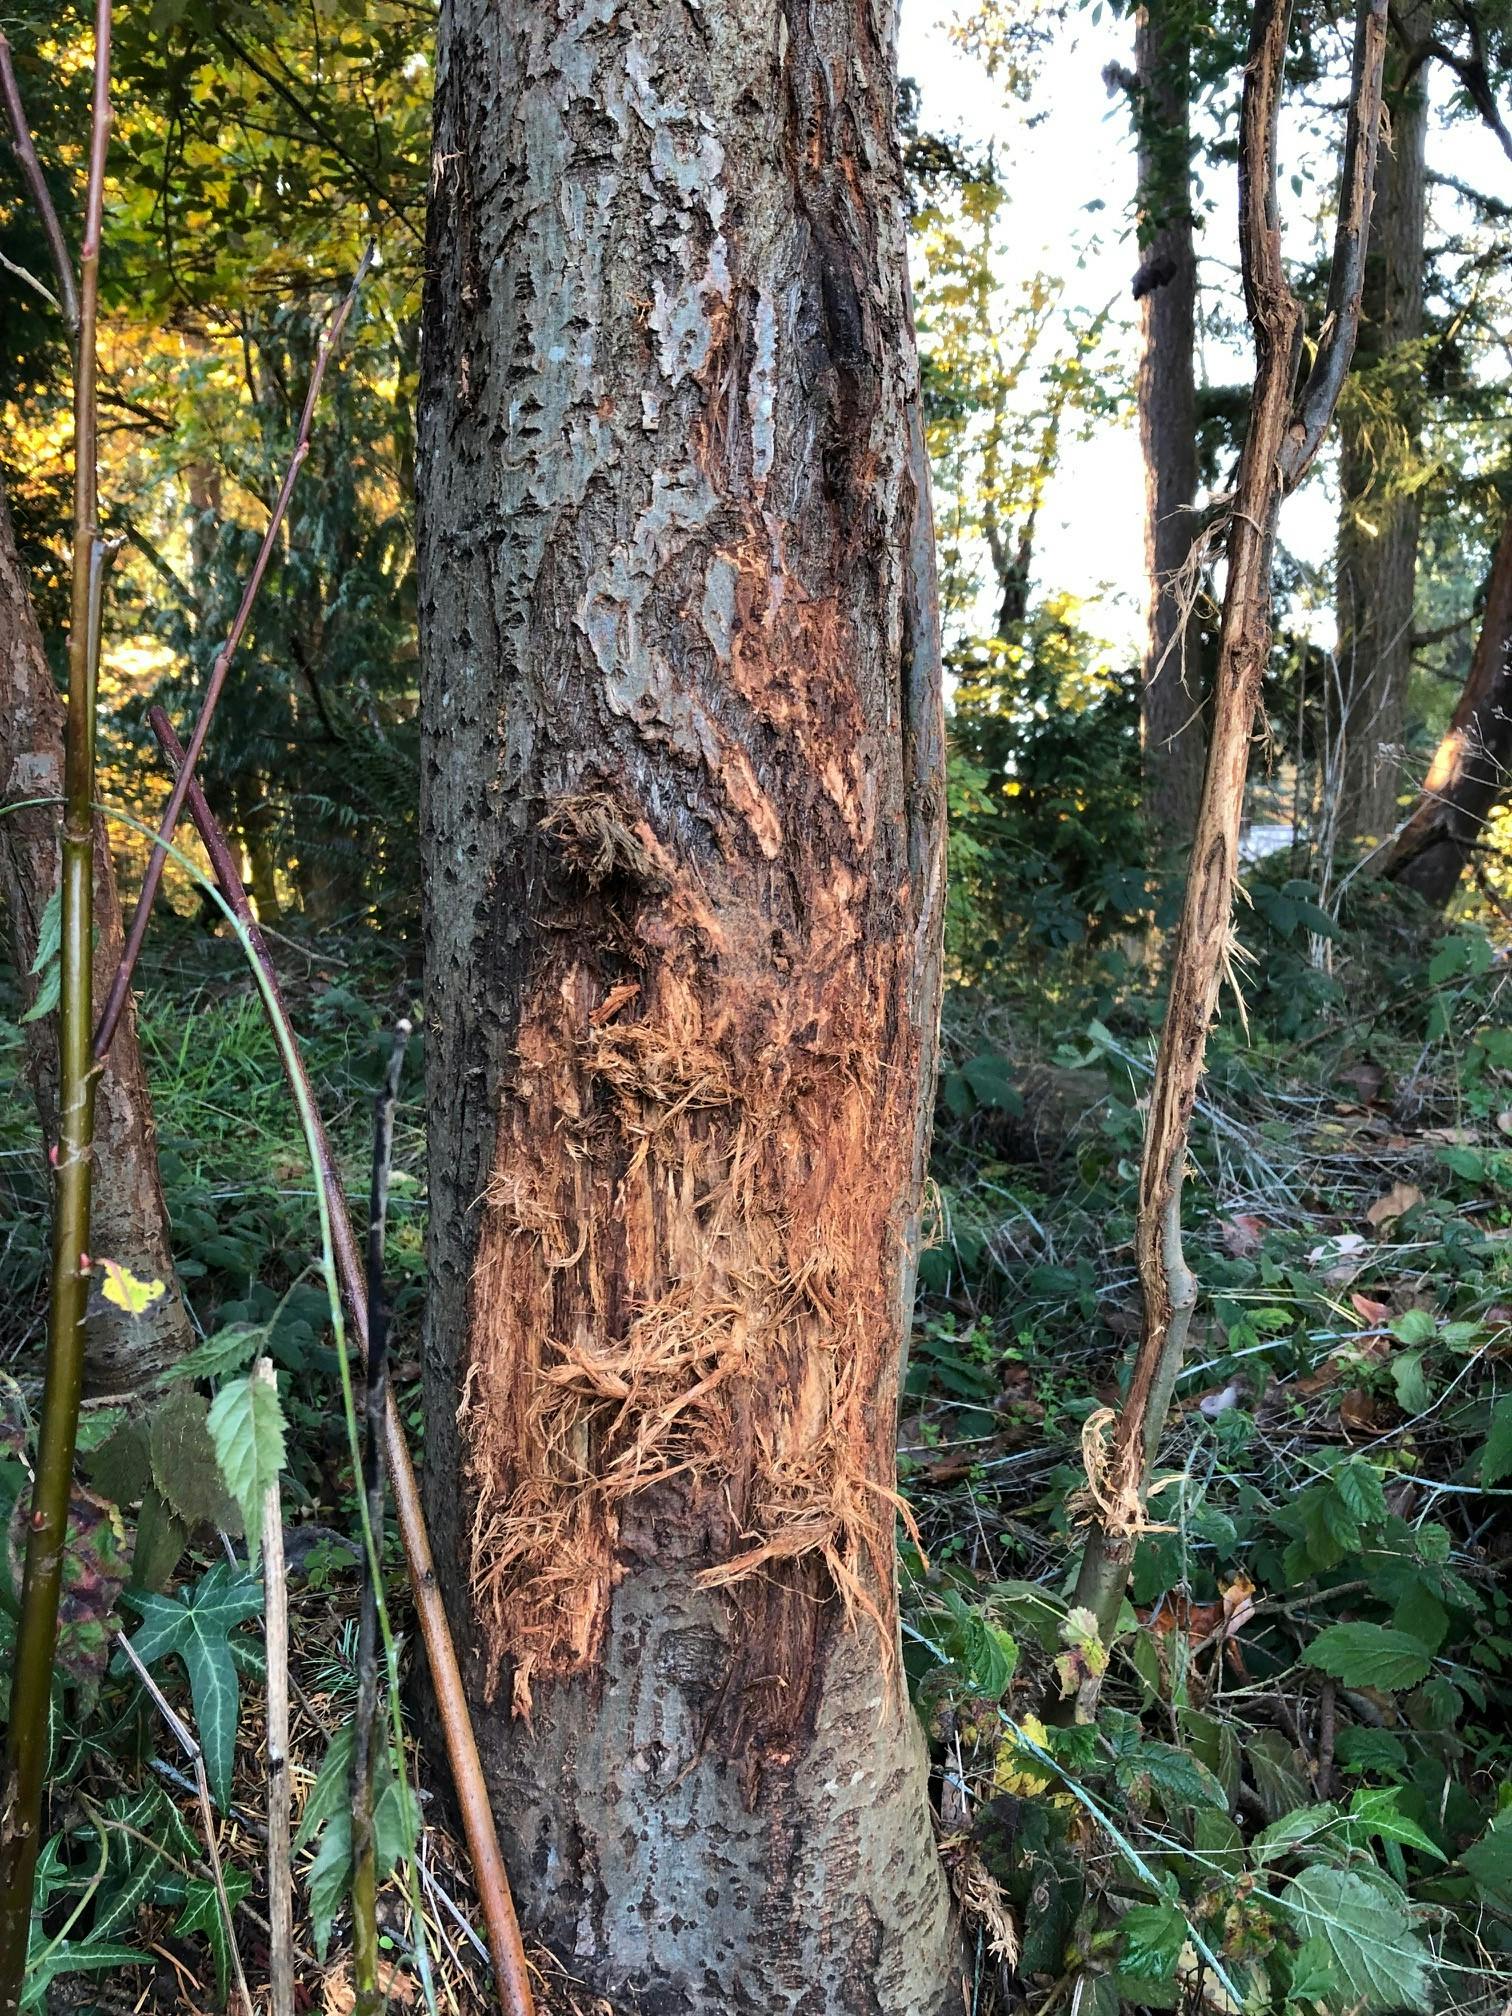 Wildwood Tree with Scratching Marks